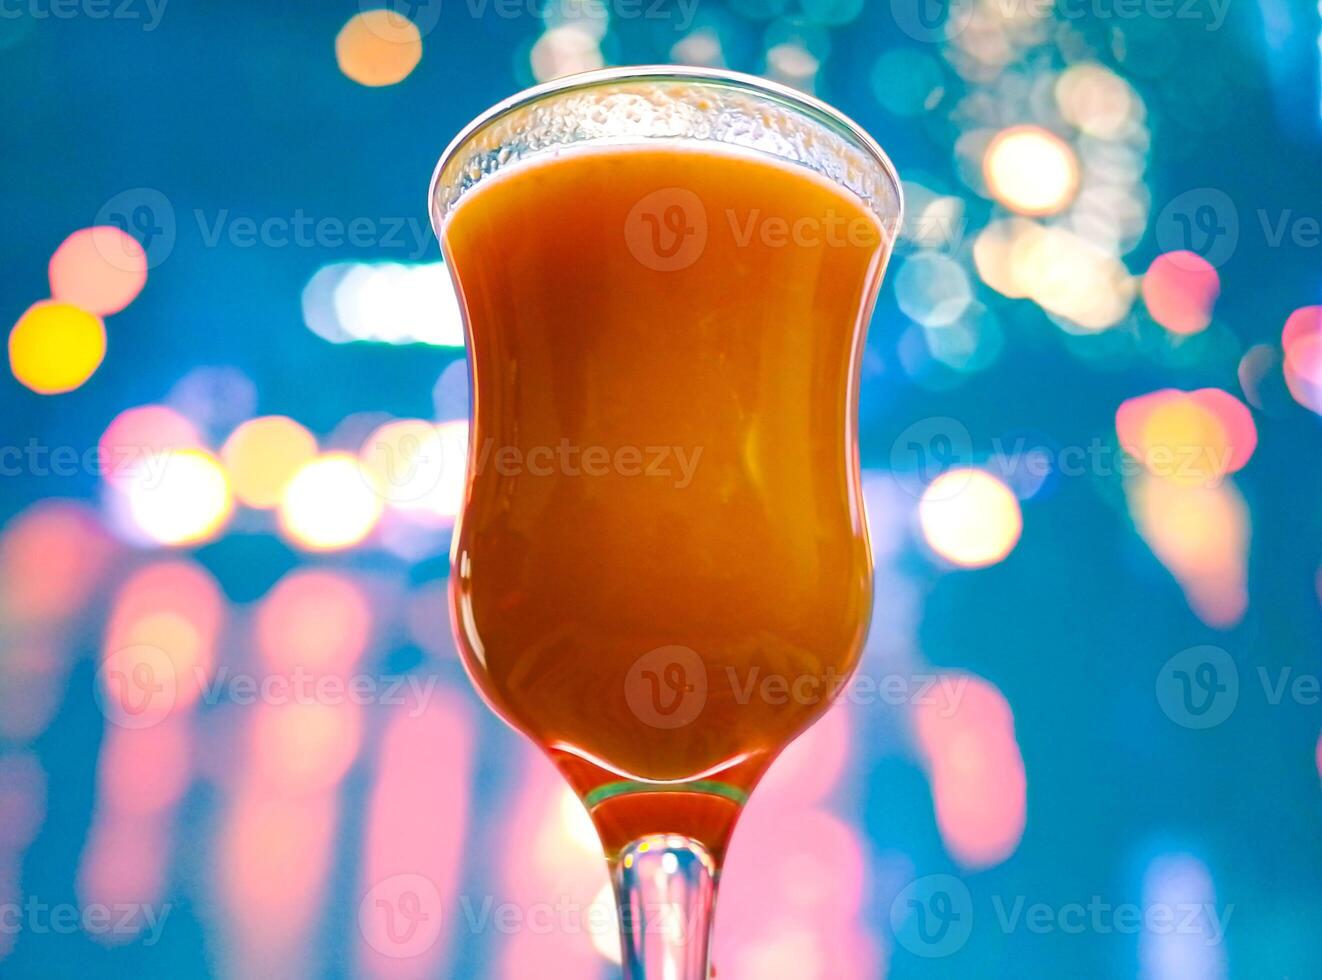 Orange Juice in Bar Glass in front of blurry blinking lights background photo